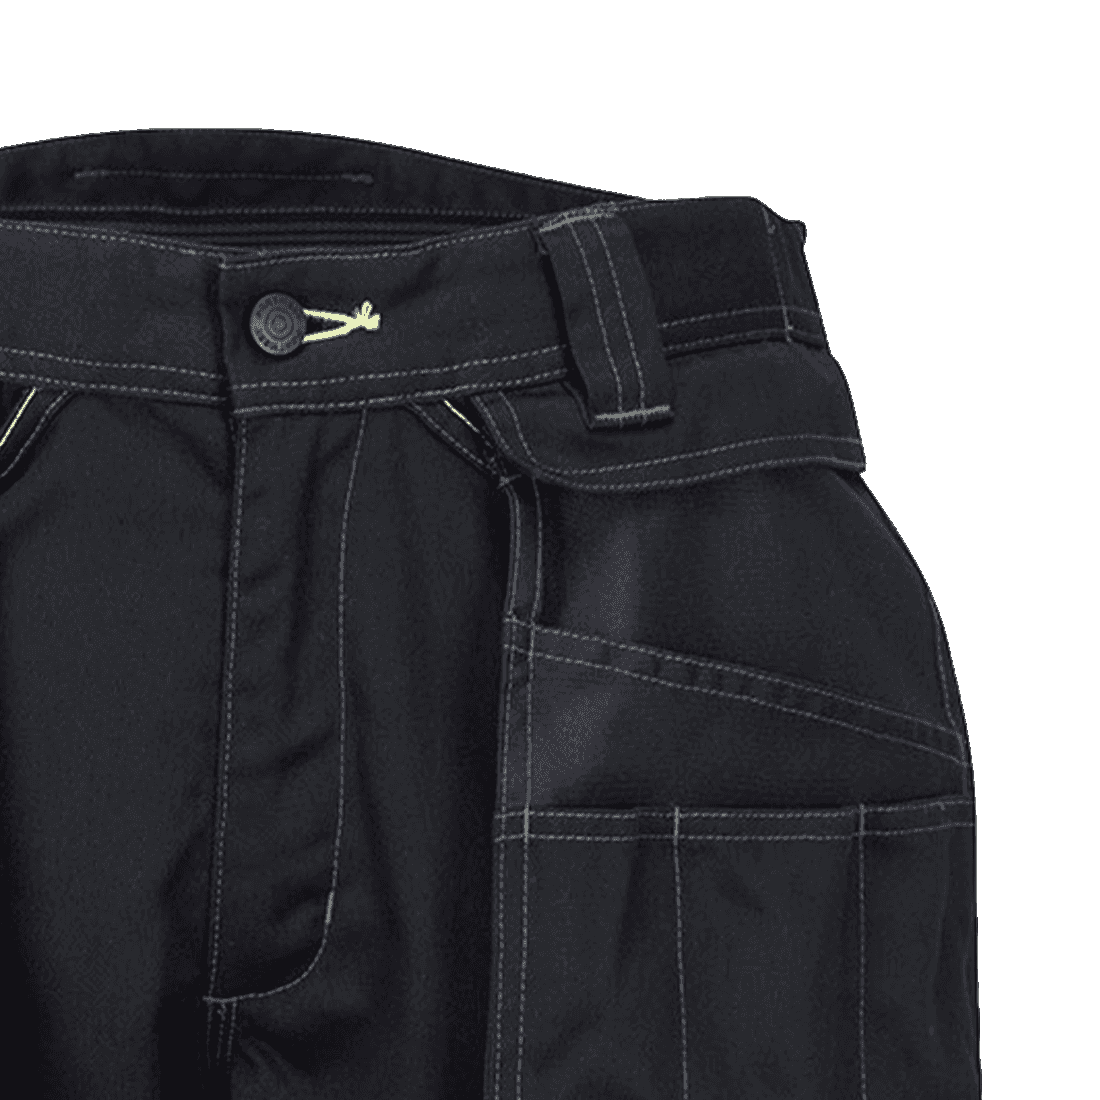 PW345 Holster Work Shorts